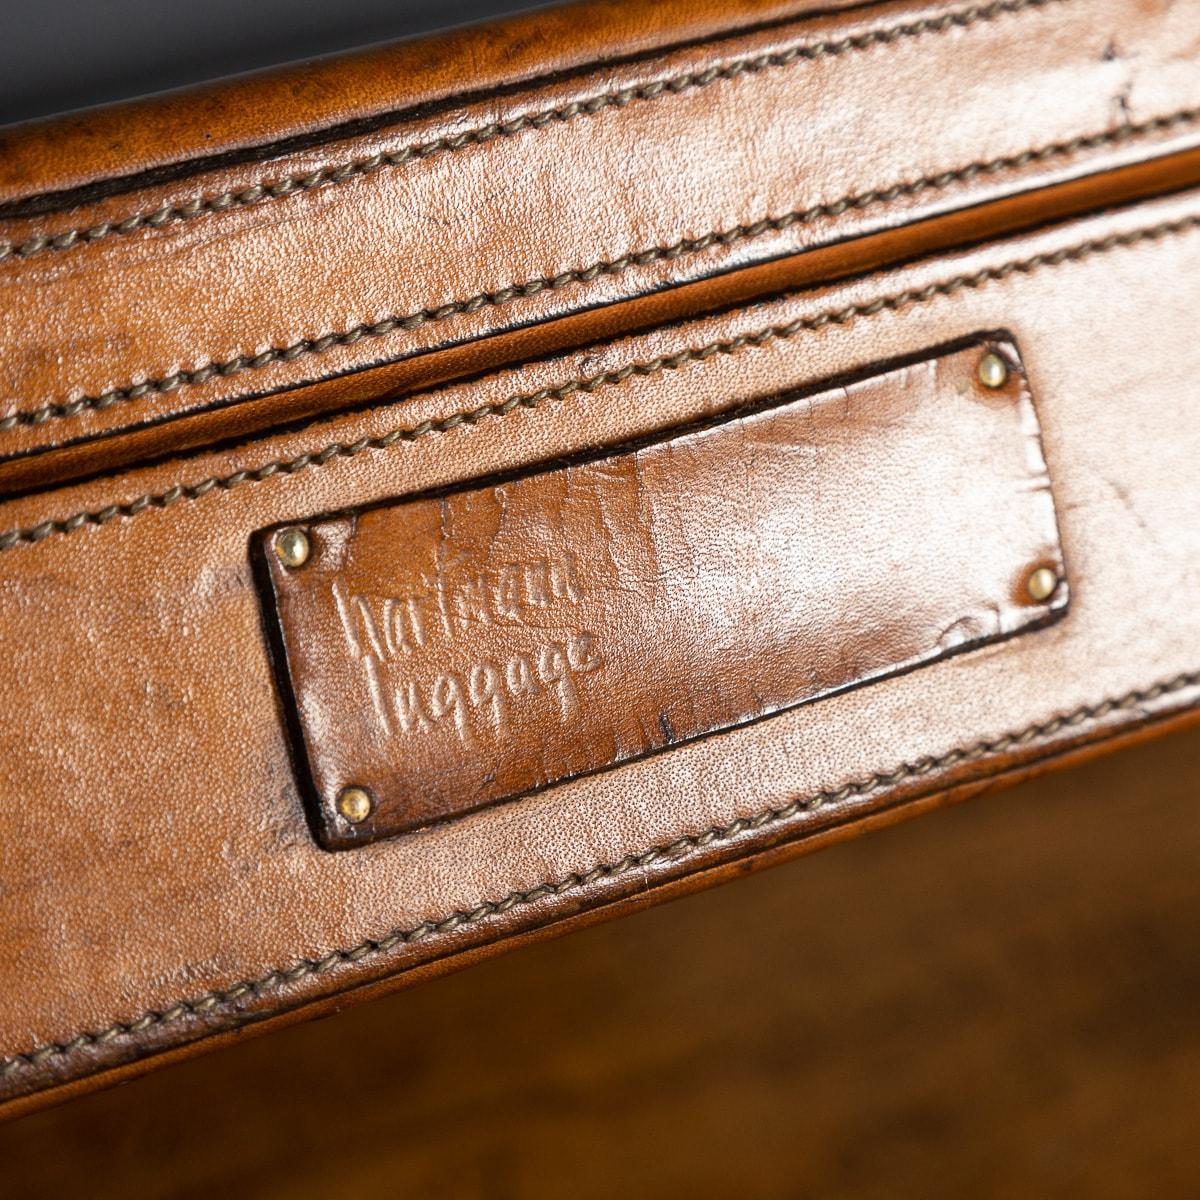 20th Century American Leather Briefcase by Hartmann, circa 1920 For Sale 12